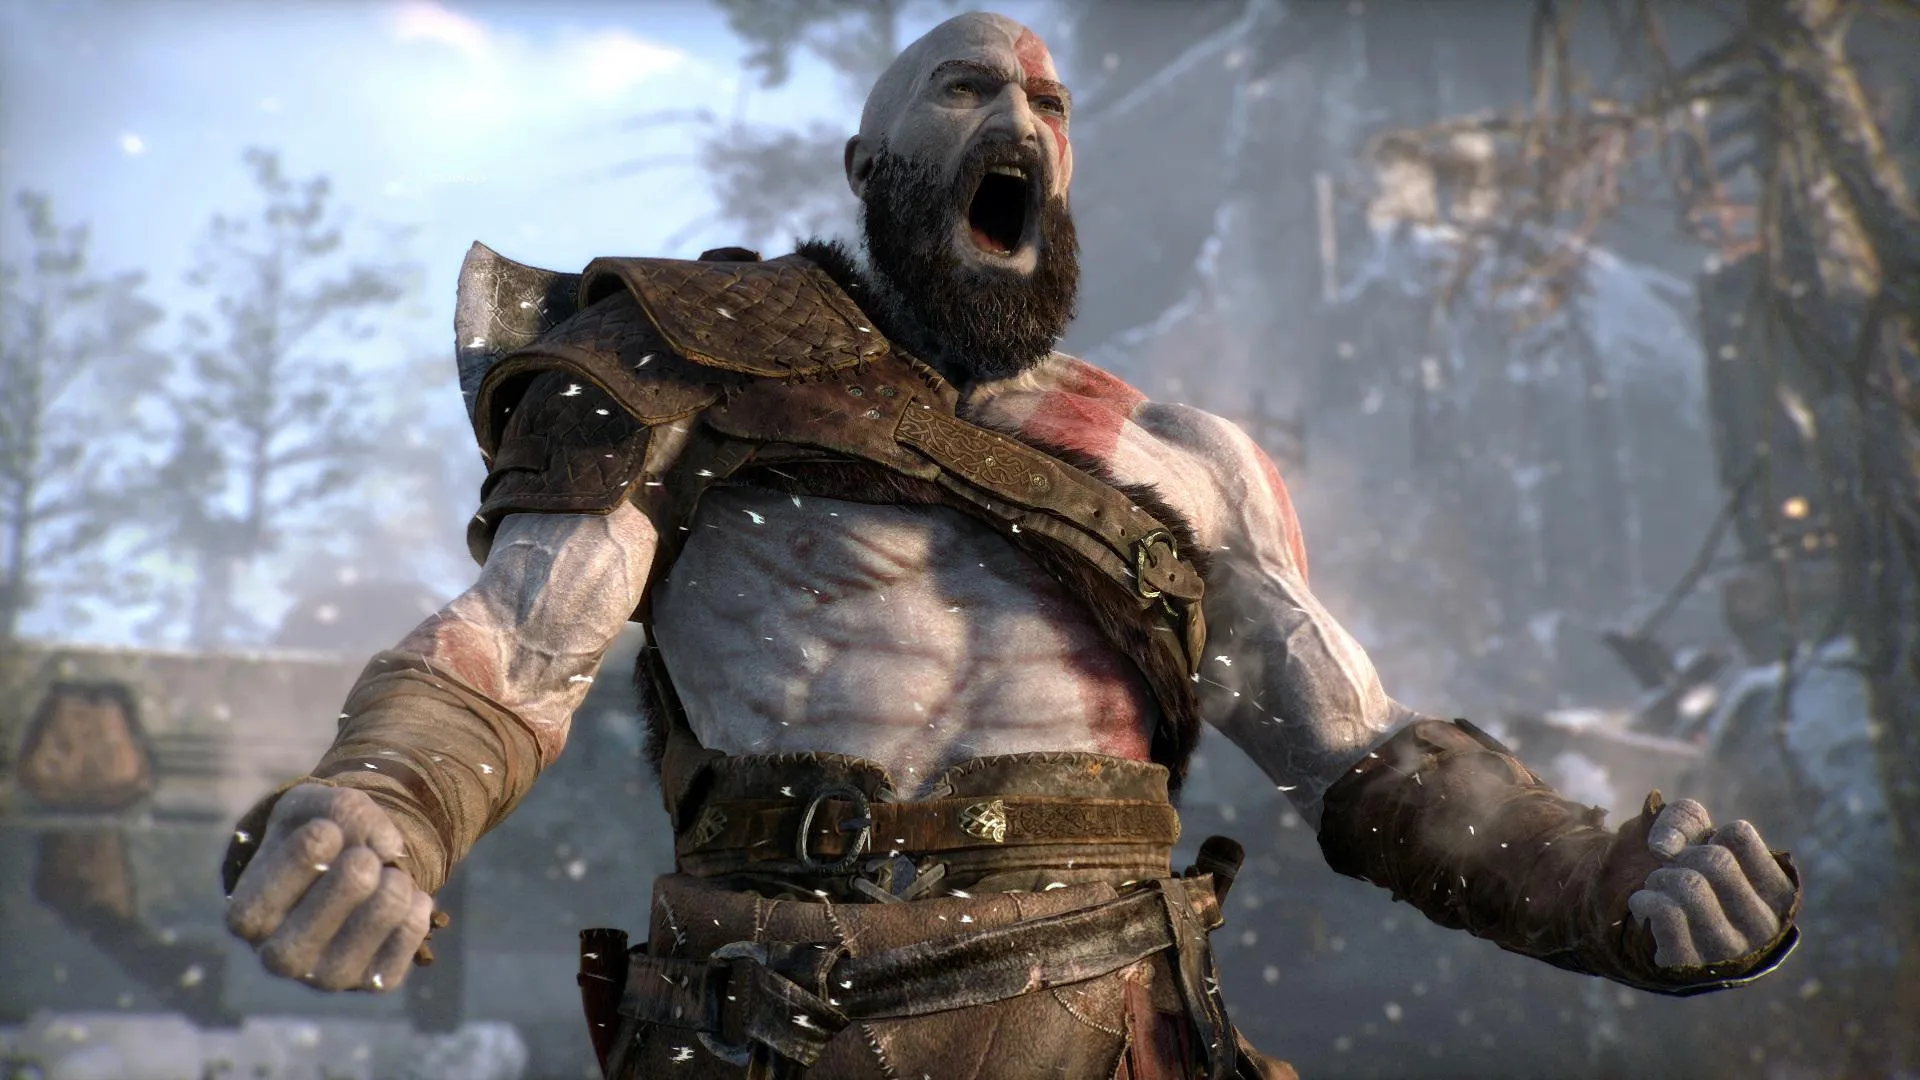 god of war wint game of the year prijs op d i c e awards 146941 1